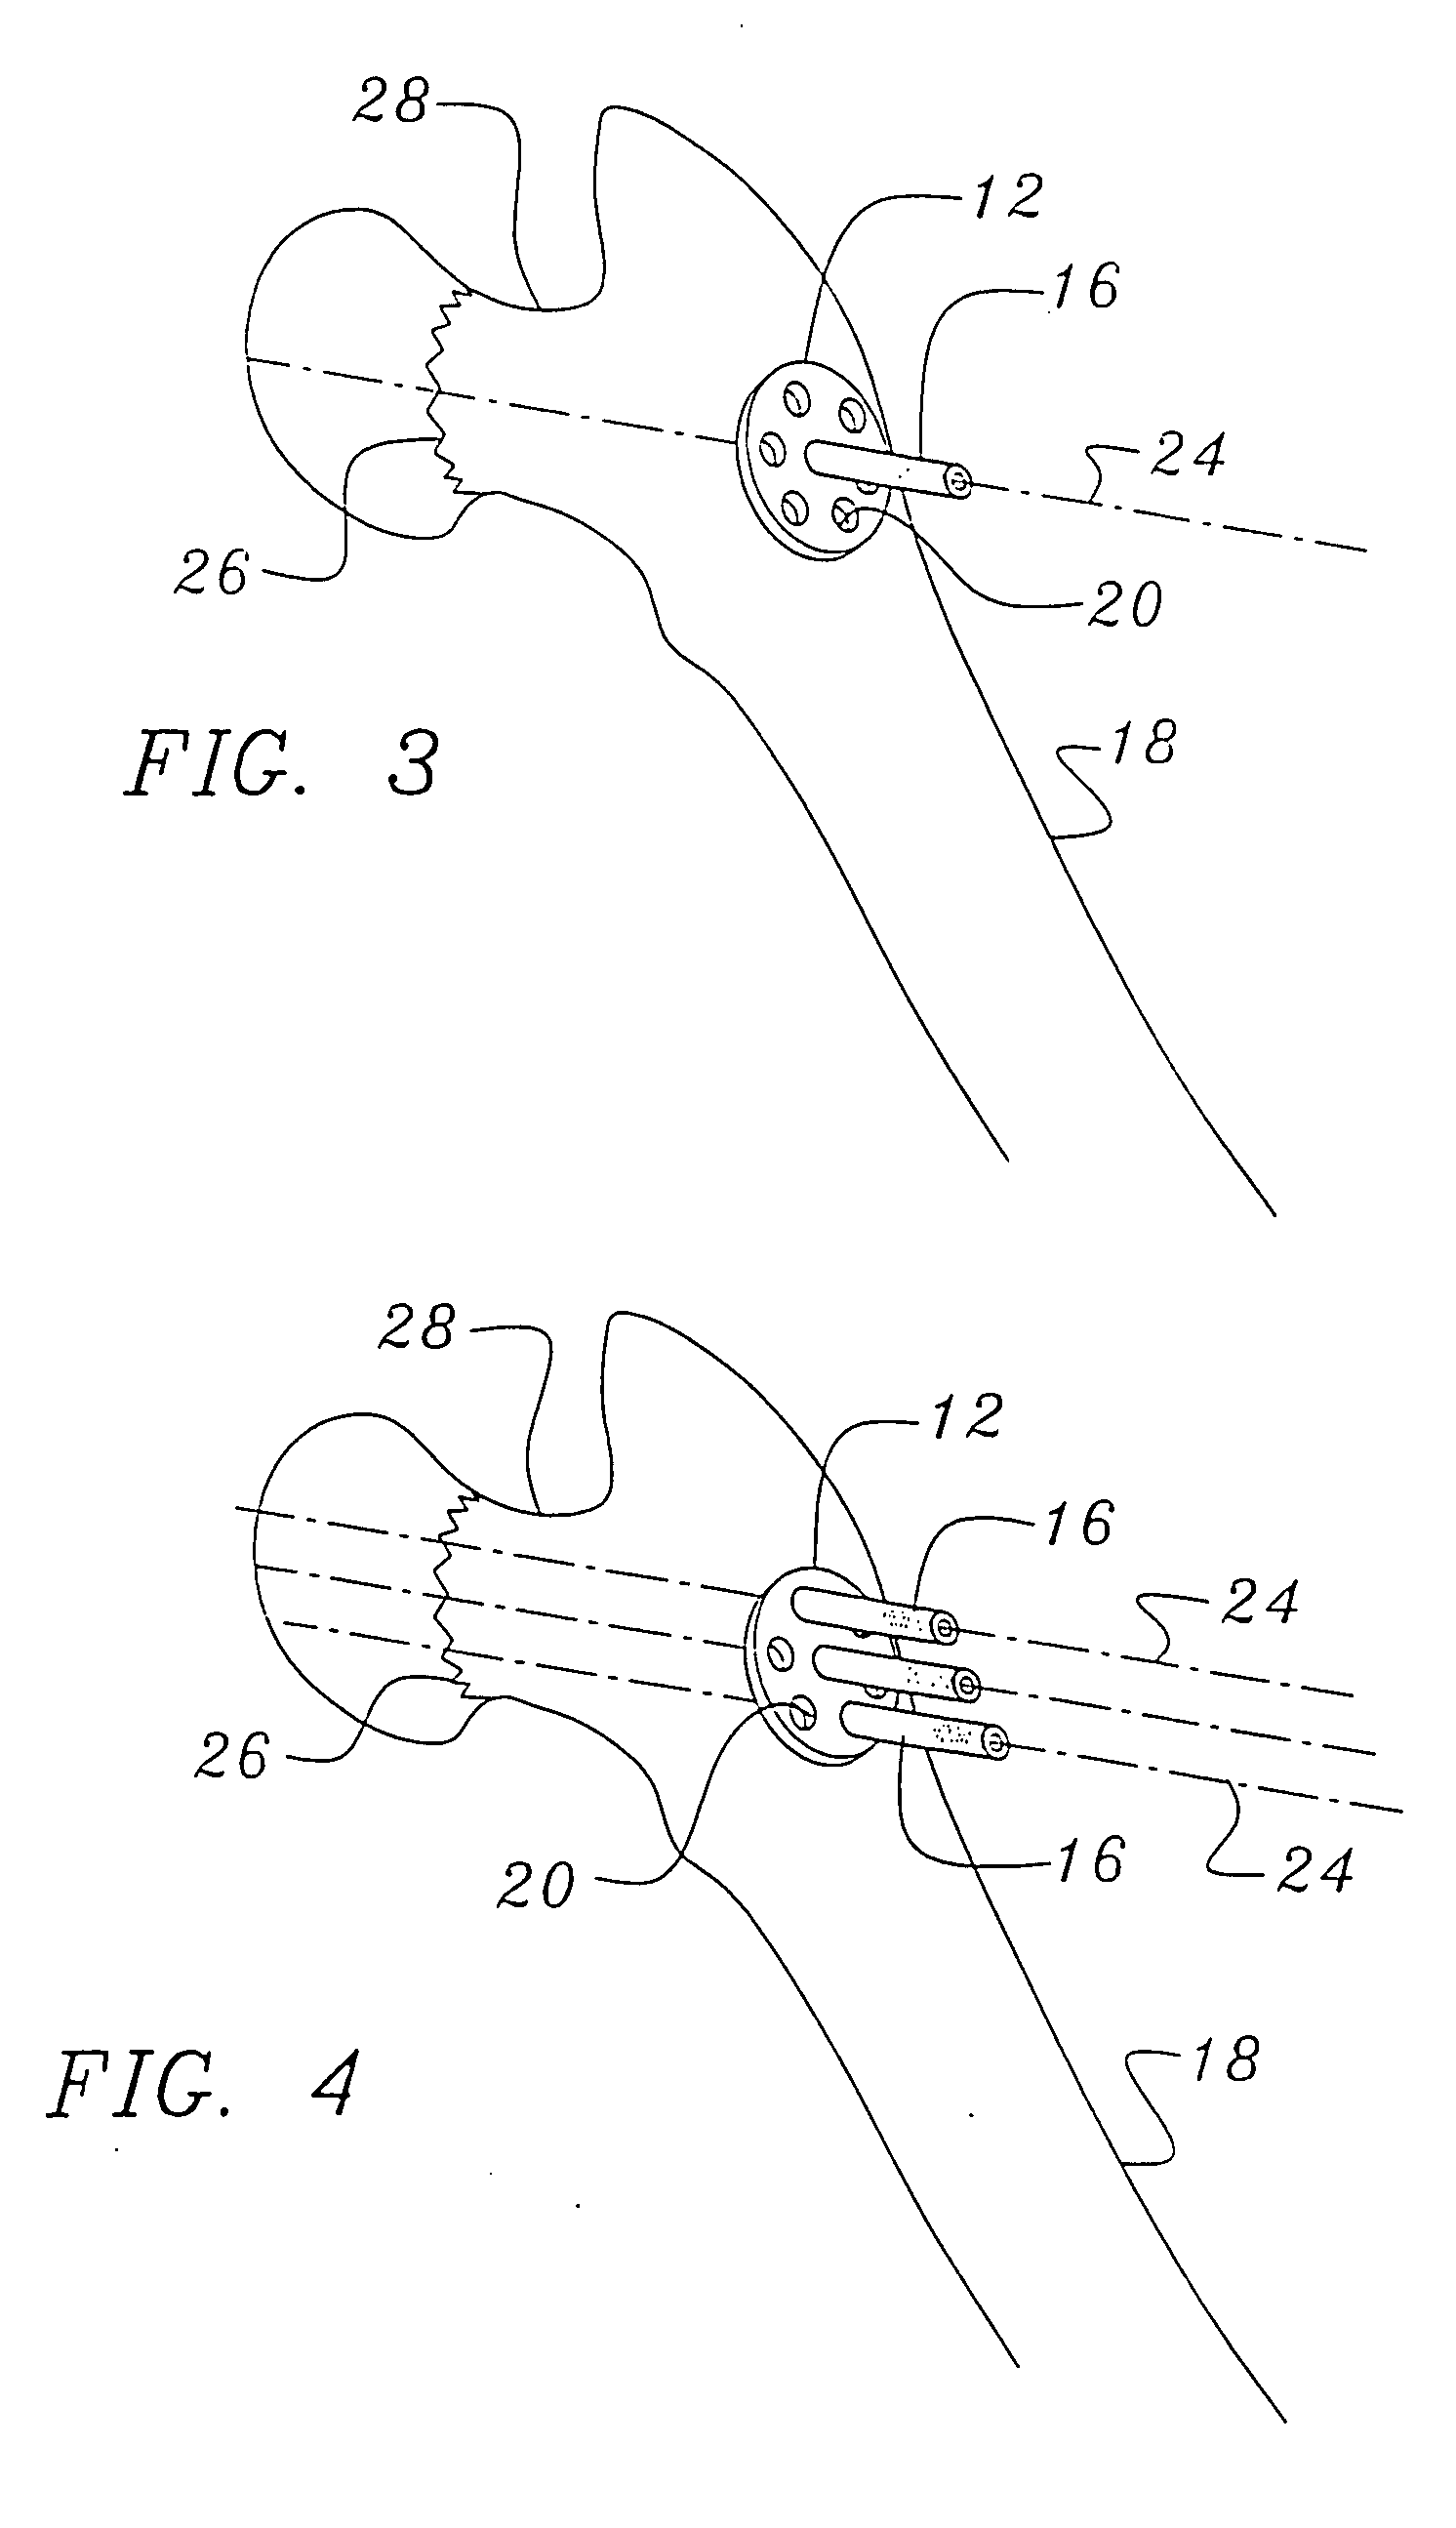 Bone end (epiphysis) fracture fixation device and method of use